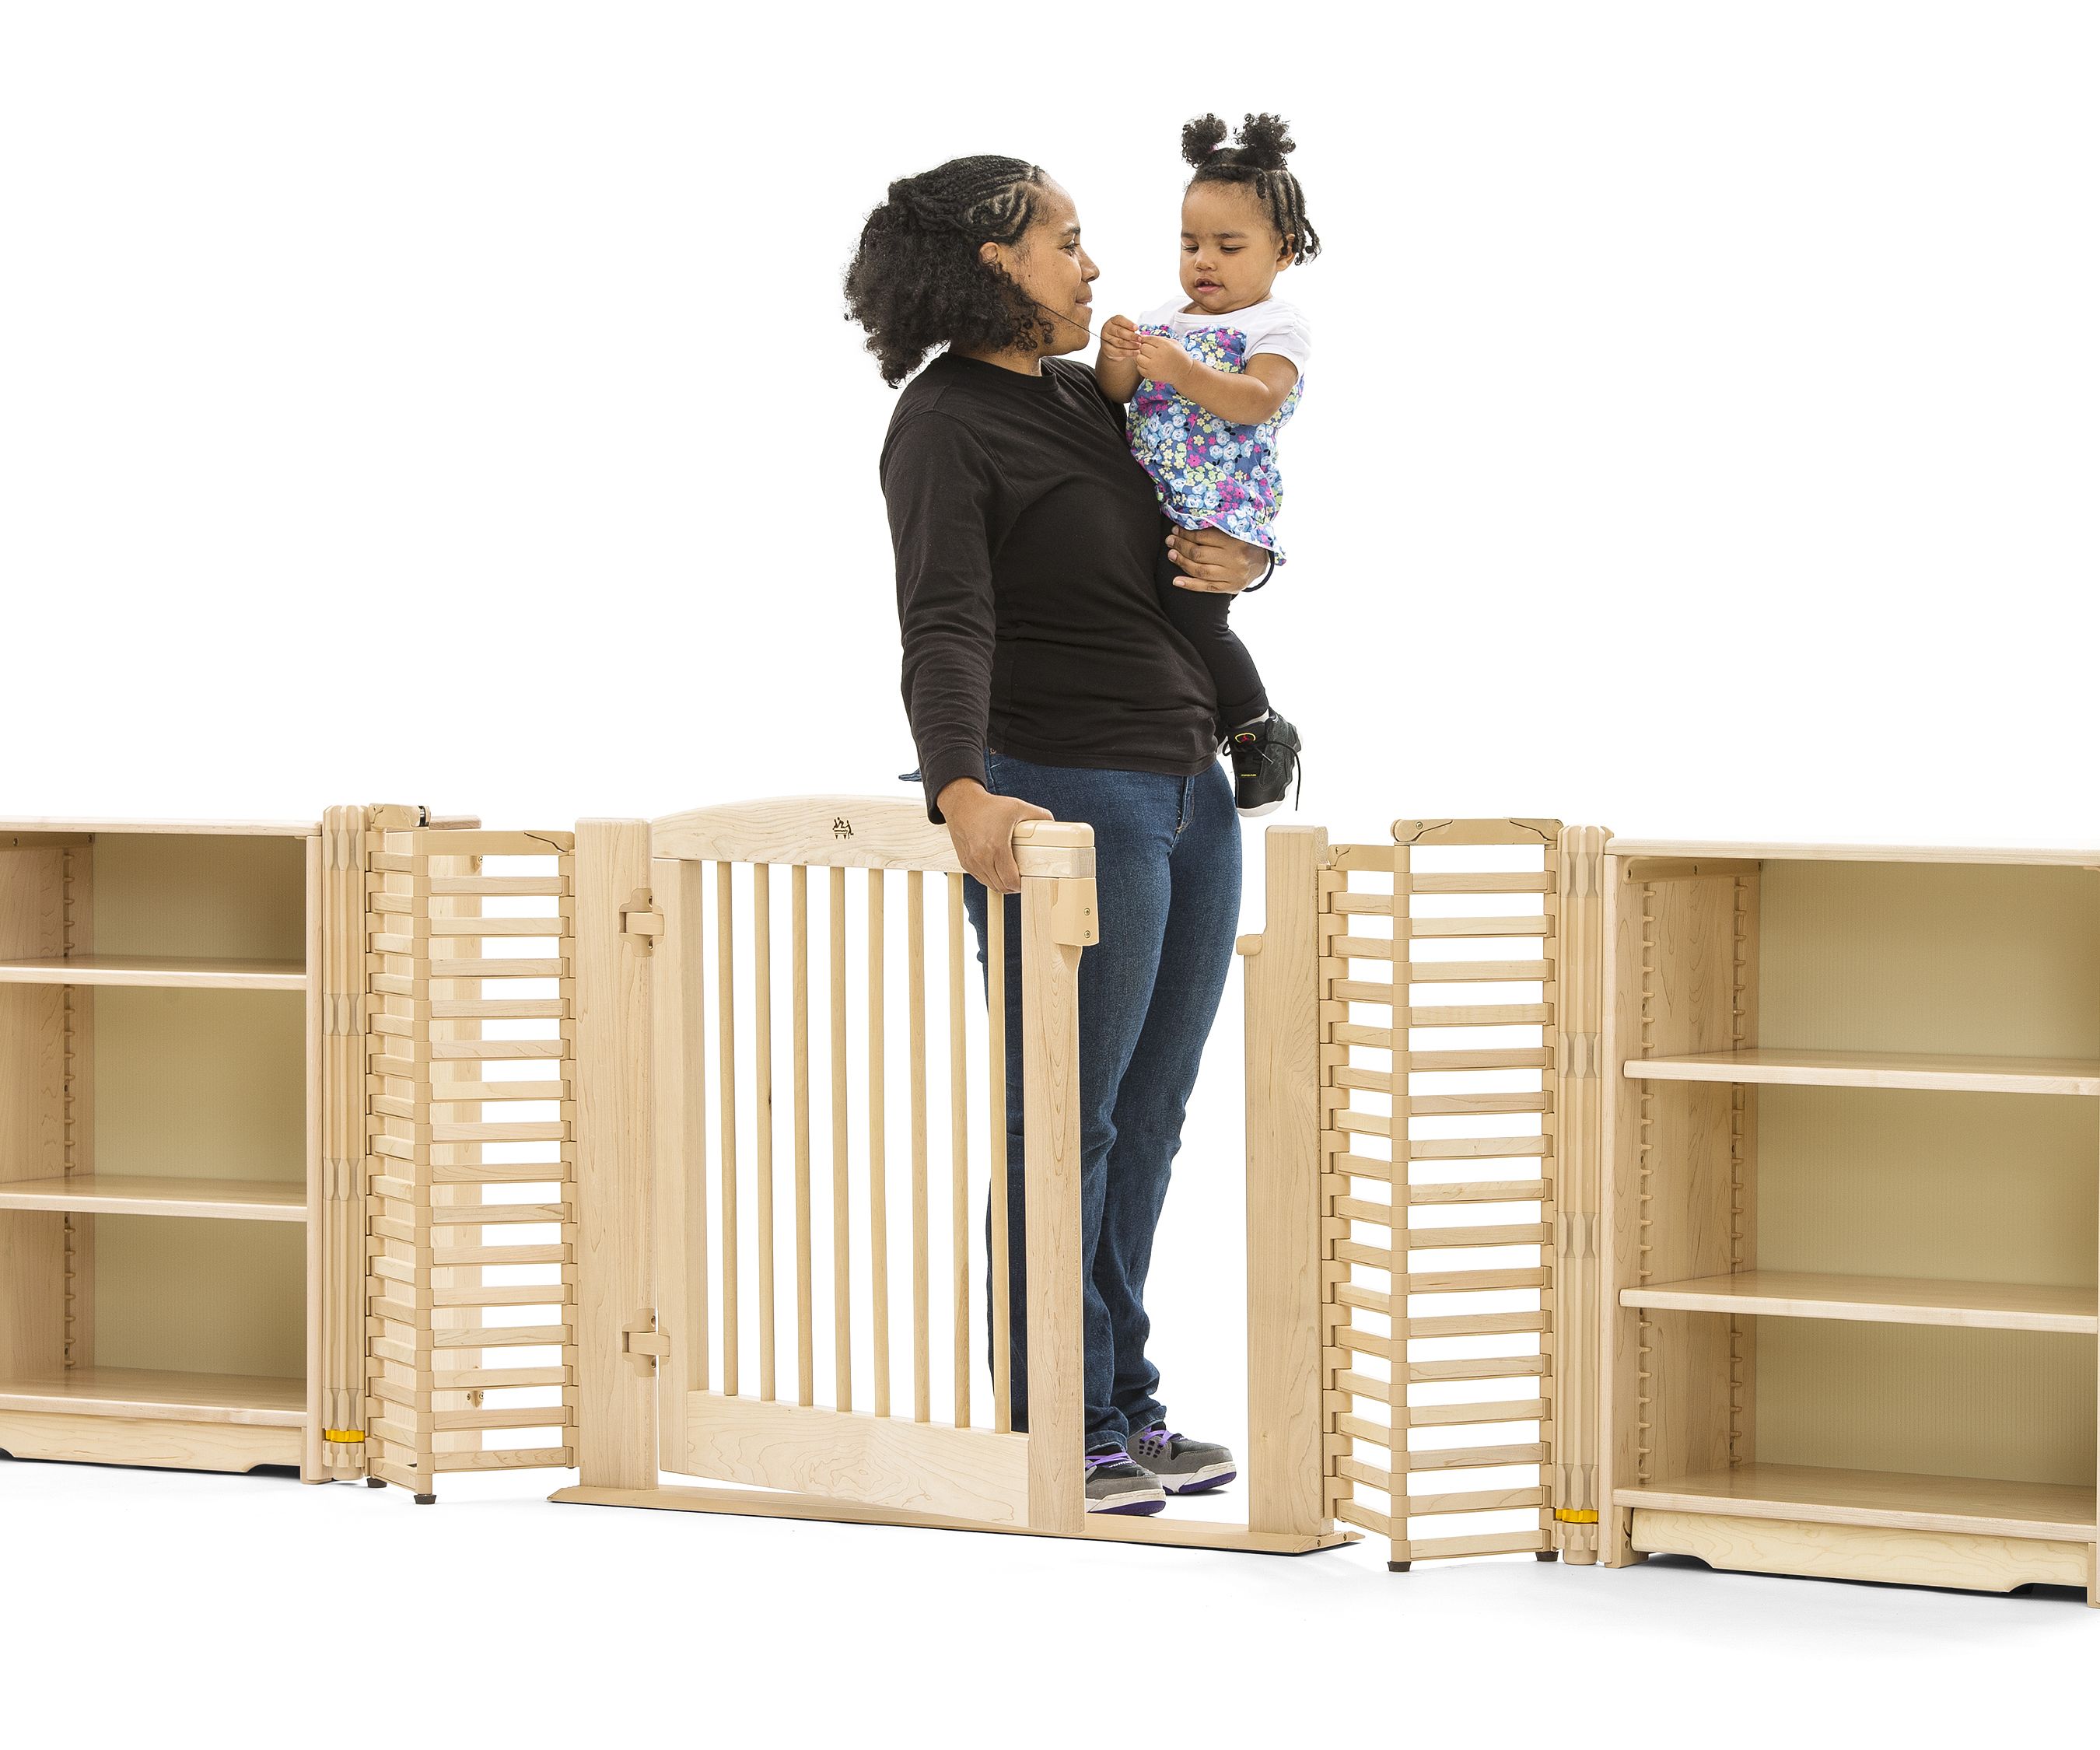 Baby Proofing Montgomery - This gated TV nook helps create a safer play  space for the little ones. #GatedTVNook #InfantSafety #ToddlerSafety  #ChildSafety #PreventTipsOvers #PreventAccidents #ChildProof #BabyProof